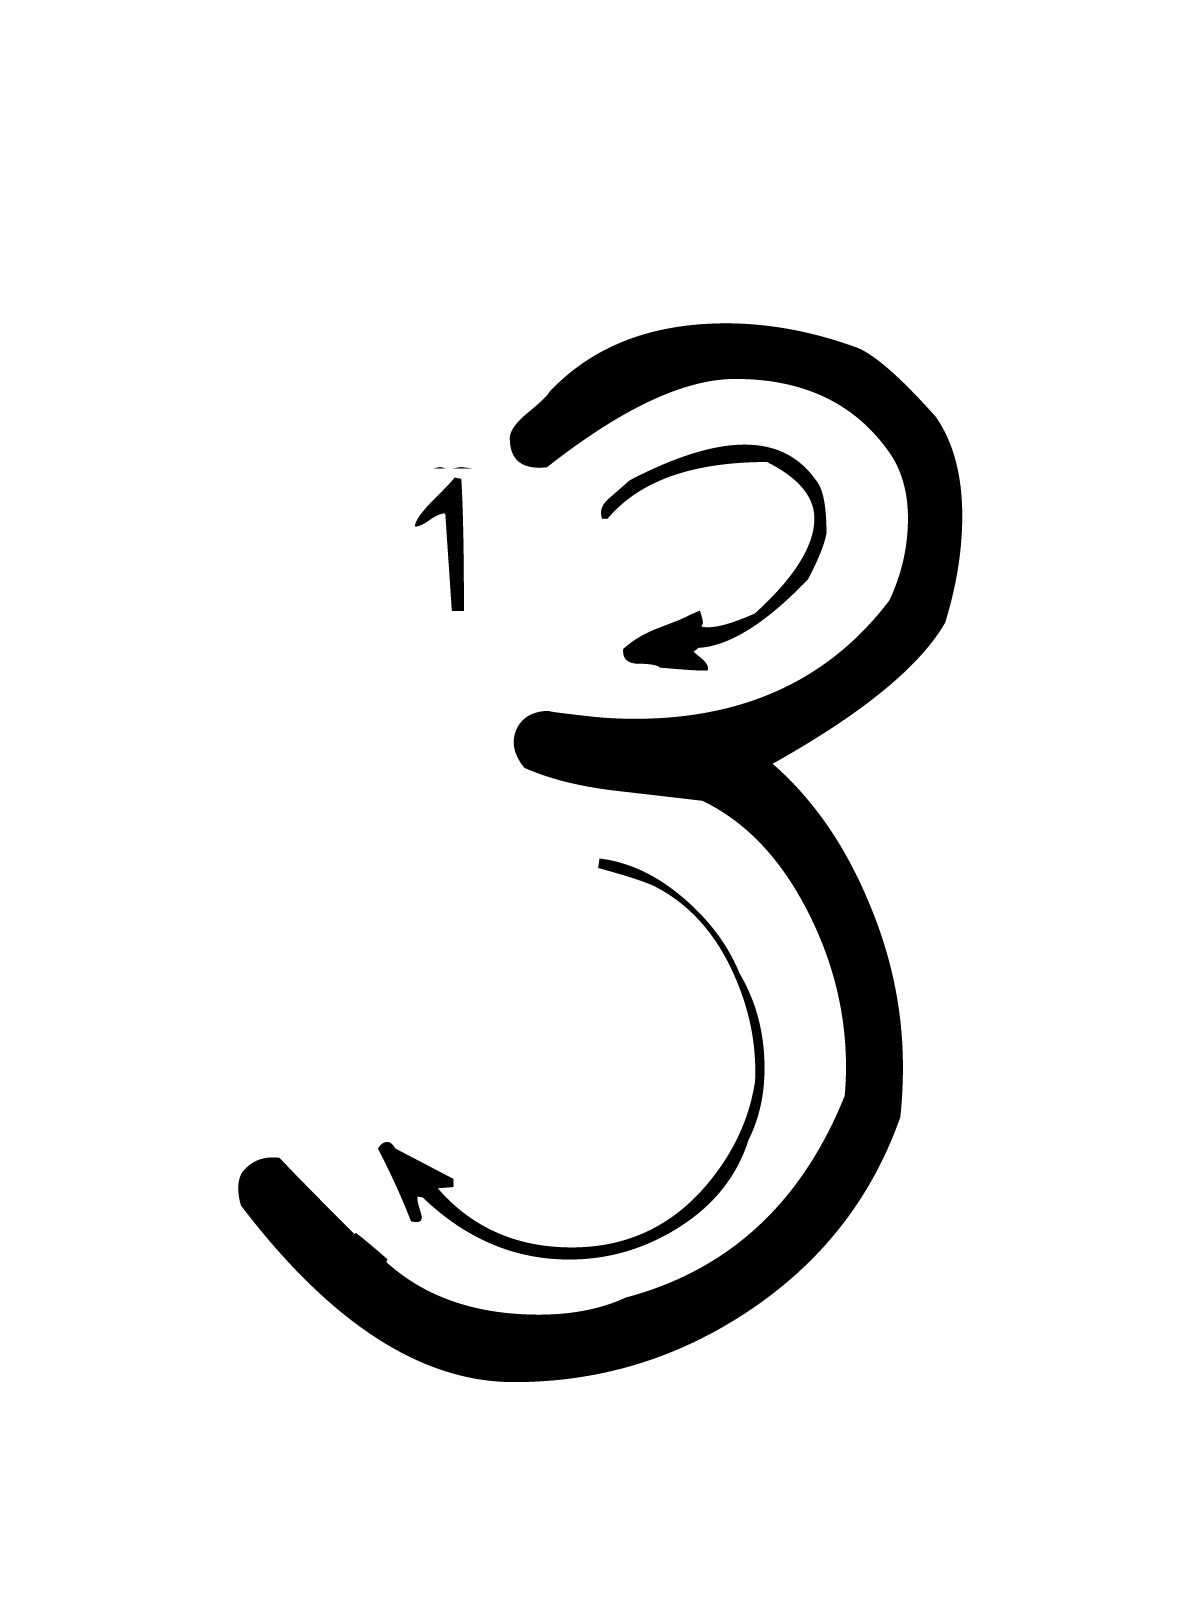 Letters and numbers - Number 3 (three) with indications cursive movement